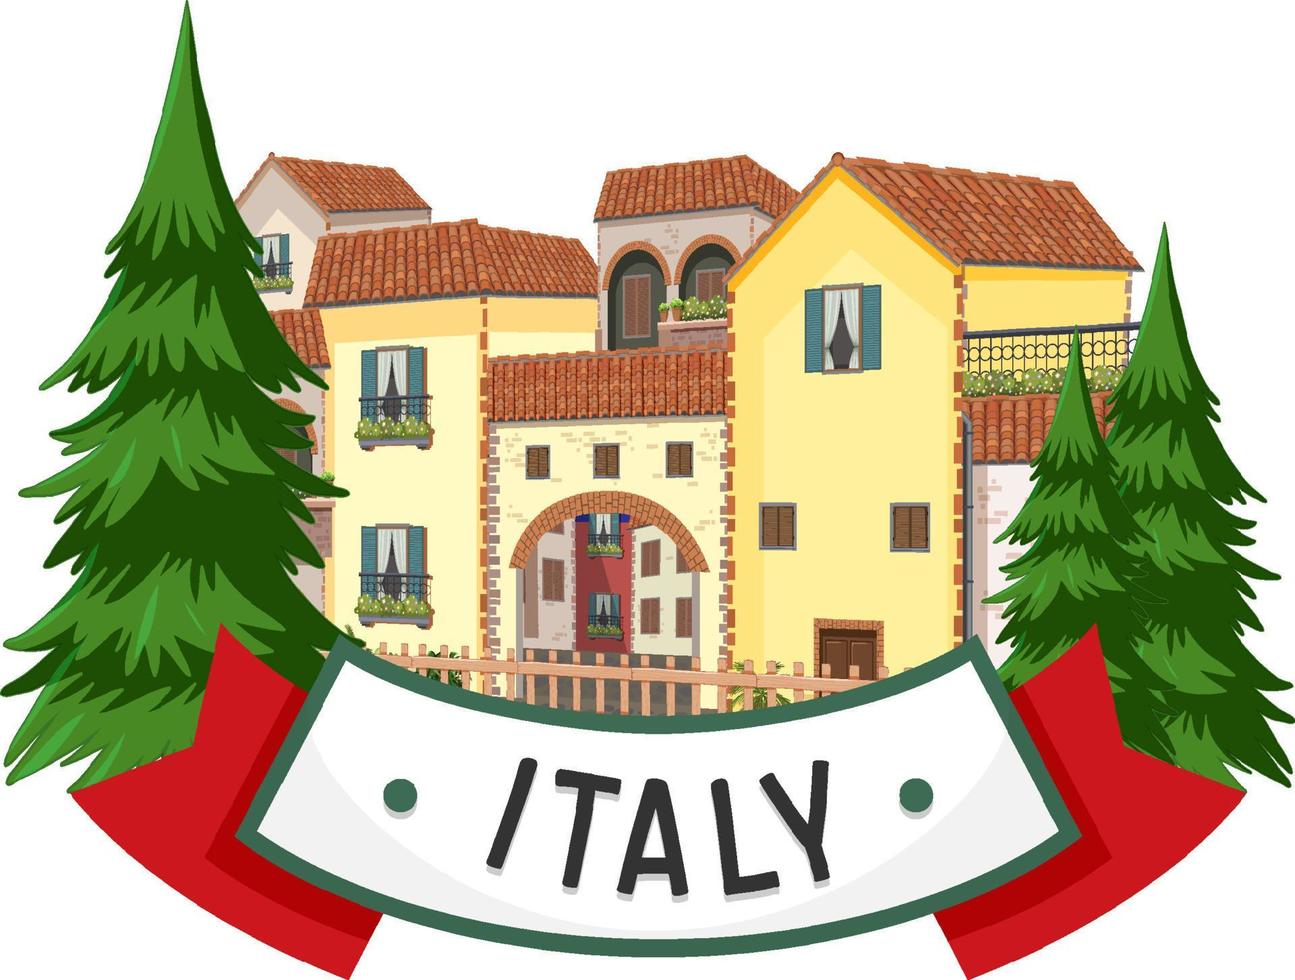 Italy banner label with house buildings vector